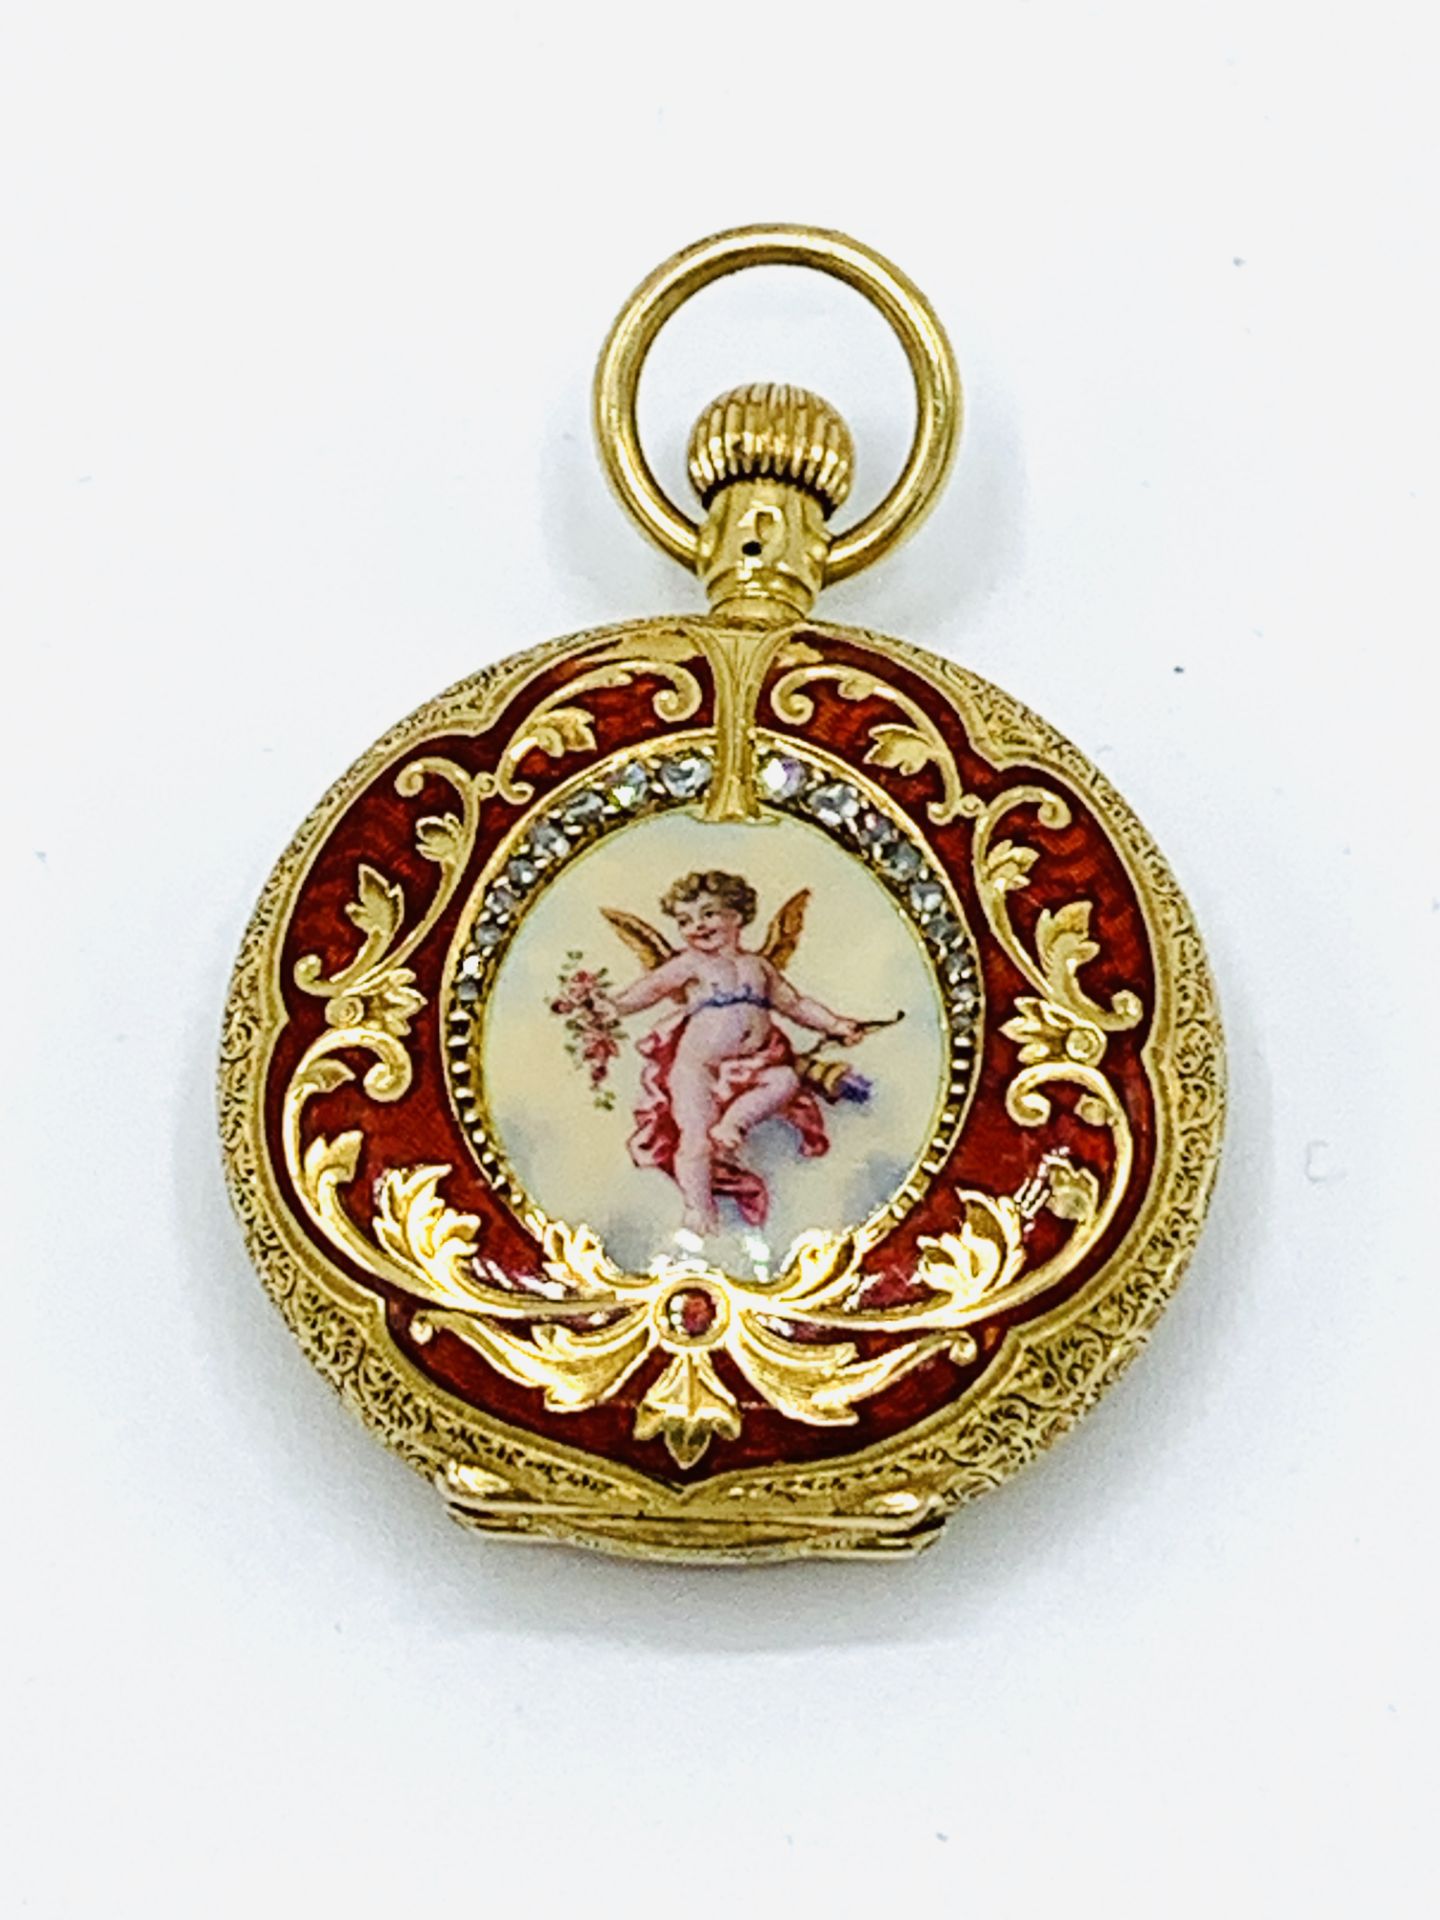 18ct gold small hunter pocket watch, with diamond and enamel cover, by Waltham, Massachusetts